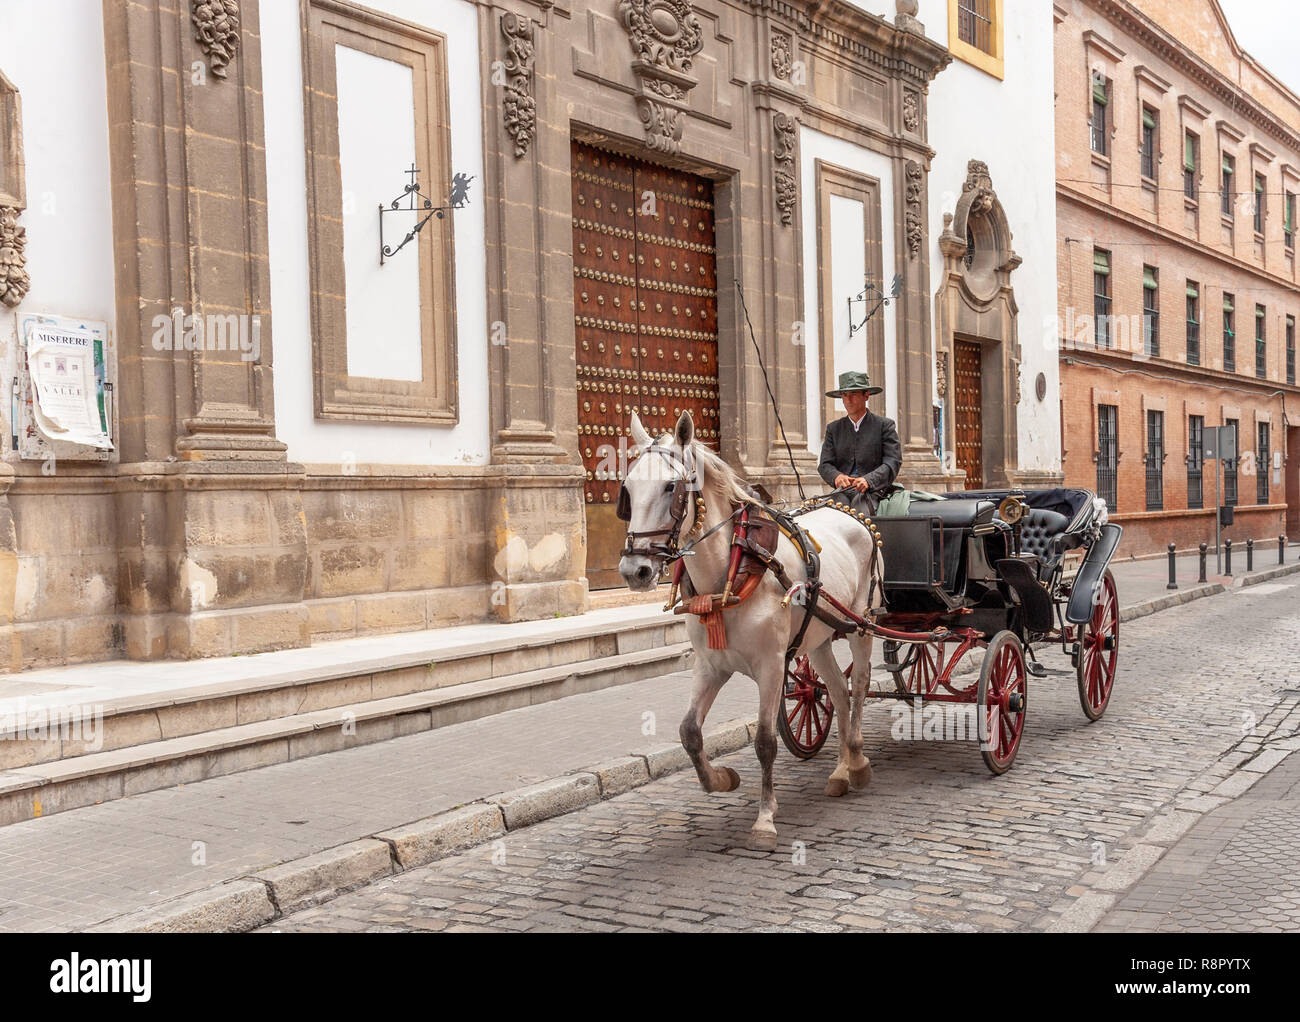 Horse and carriage going down old town street, Seville, Spain Stock Photo